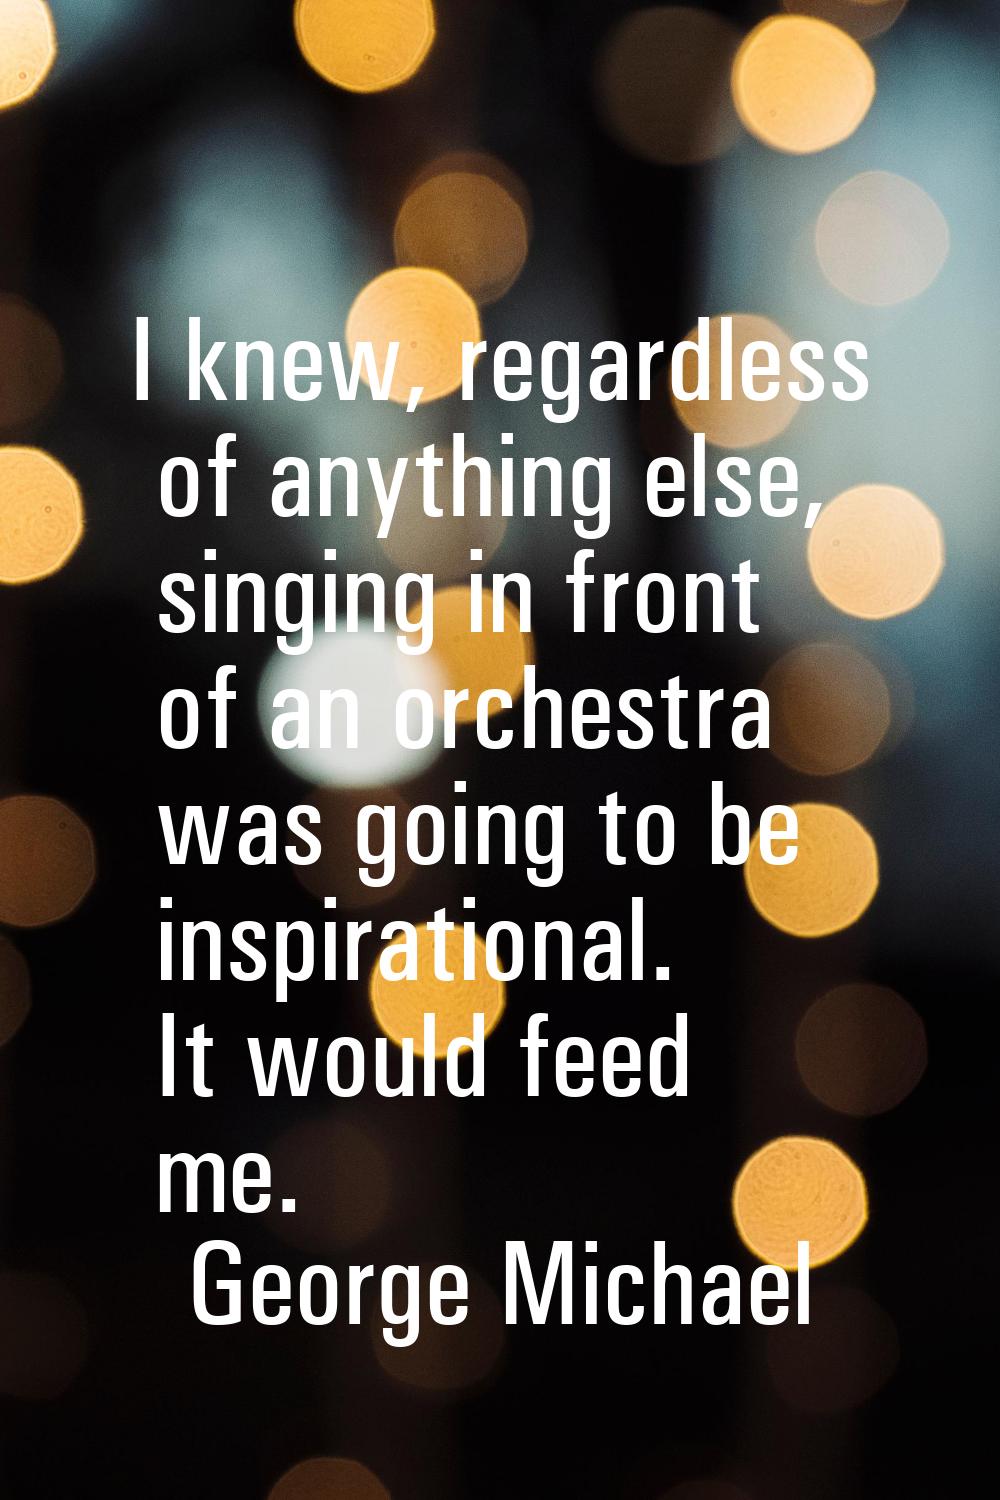 I knew, regardless of anything else, singing in front of an orchestra was going to be inspirational